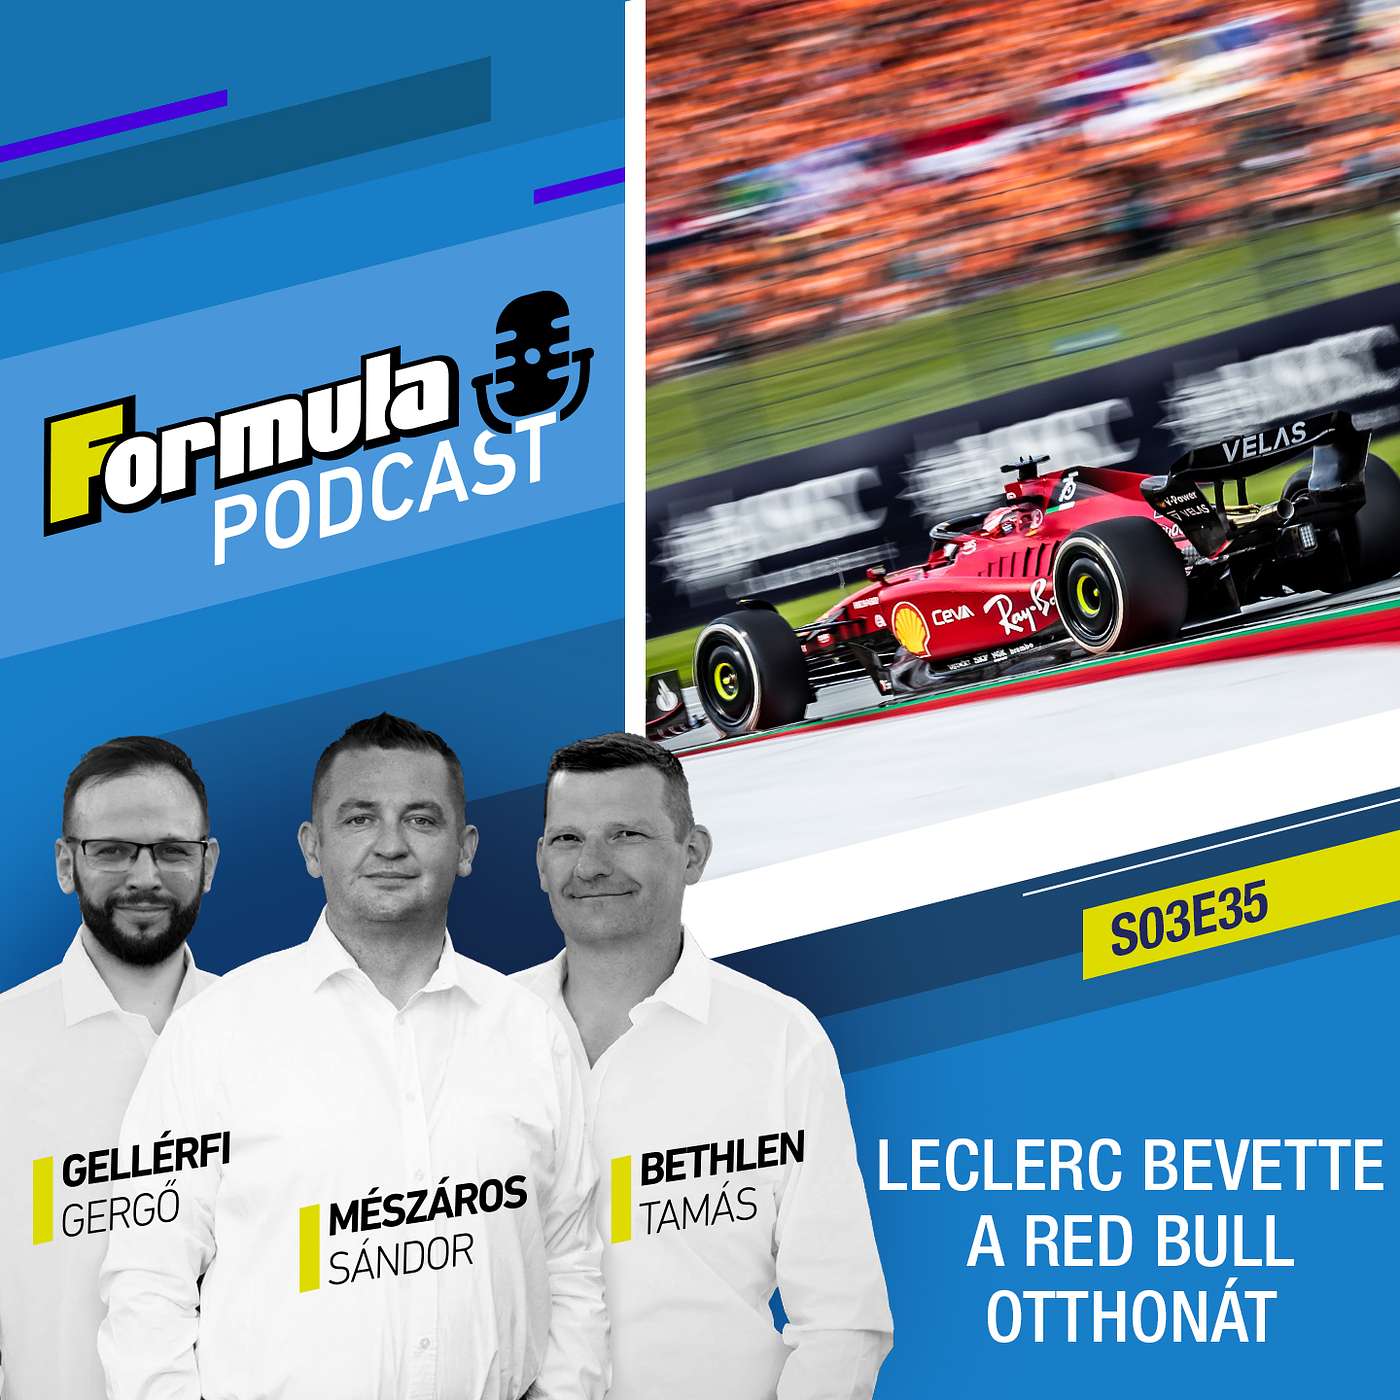 S03EP35 – Leclerc bevette a Red Bull otthonát